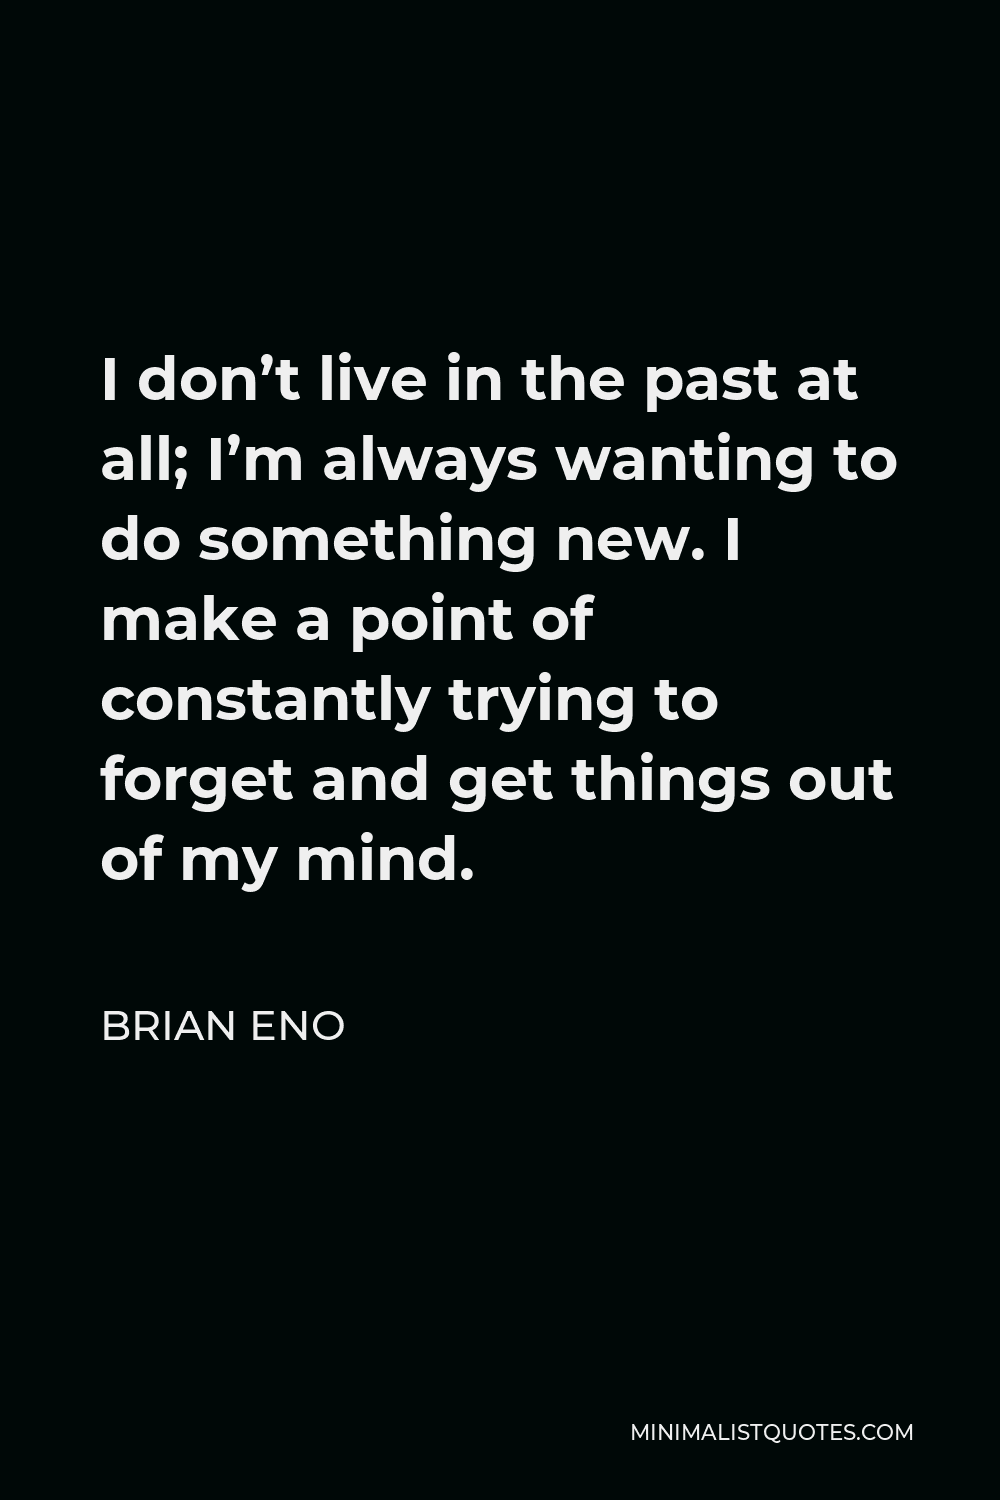 Brian Eno Quote - I don’t live in the past at all; I’m always wanting to do something new. I make a point of constantly trying to forget and get things out of my mind.